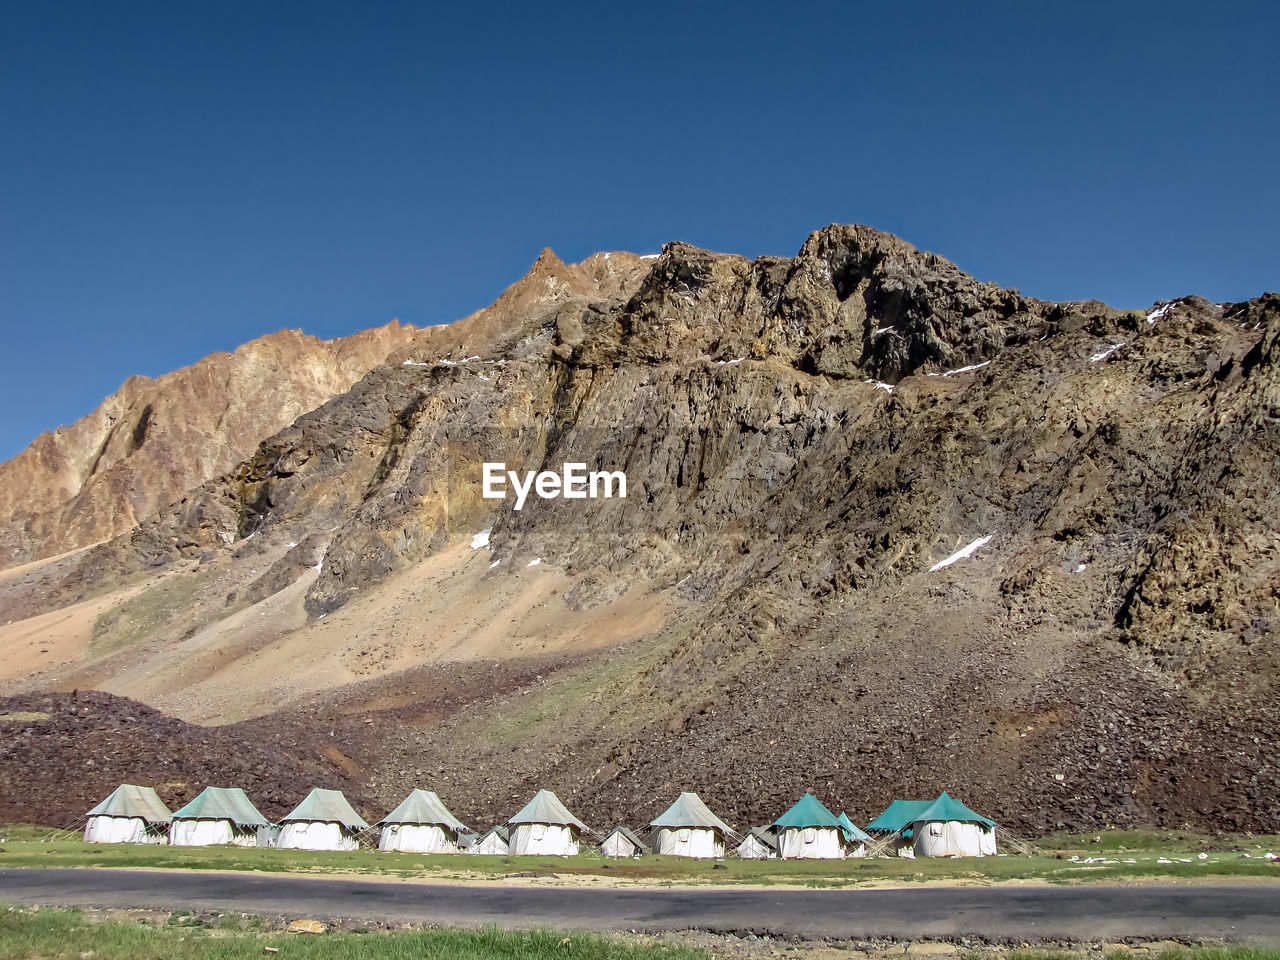 Tents for on way stay accommodation in sarchu , with mountain and sky in background.